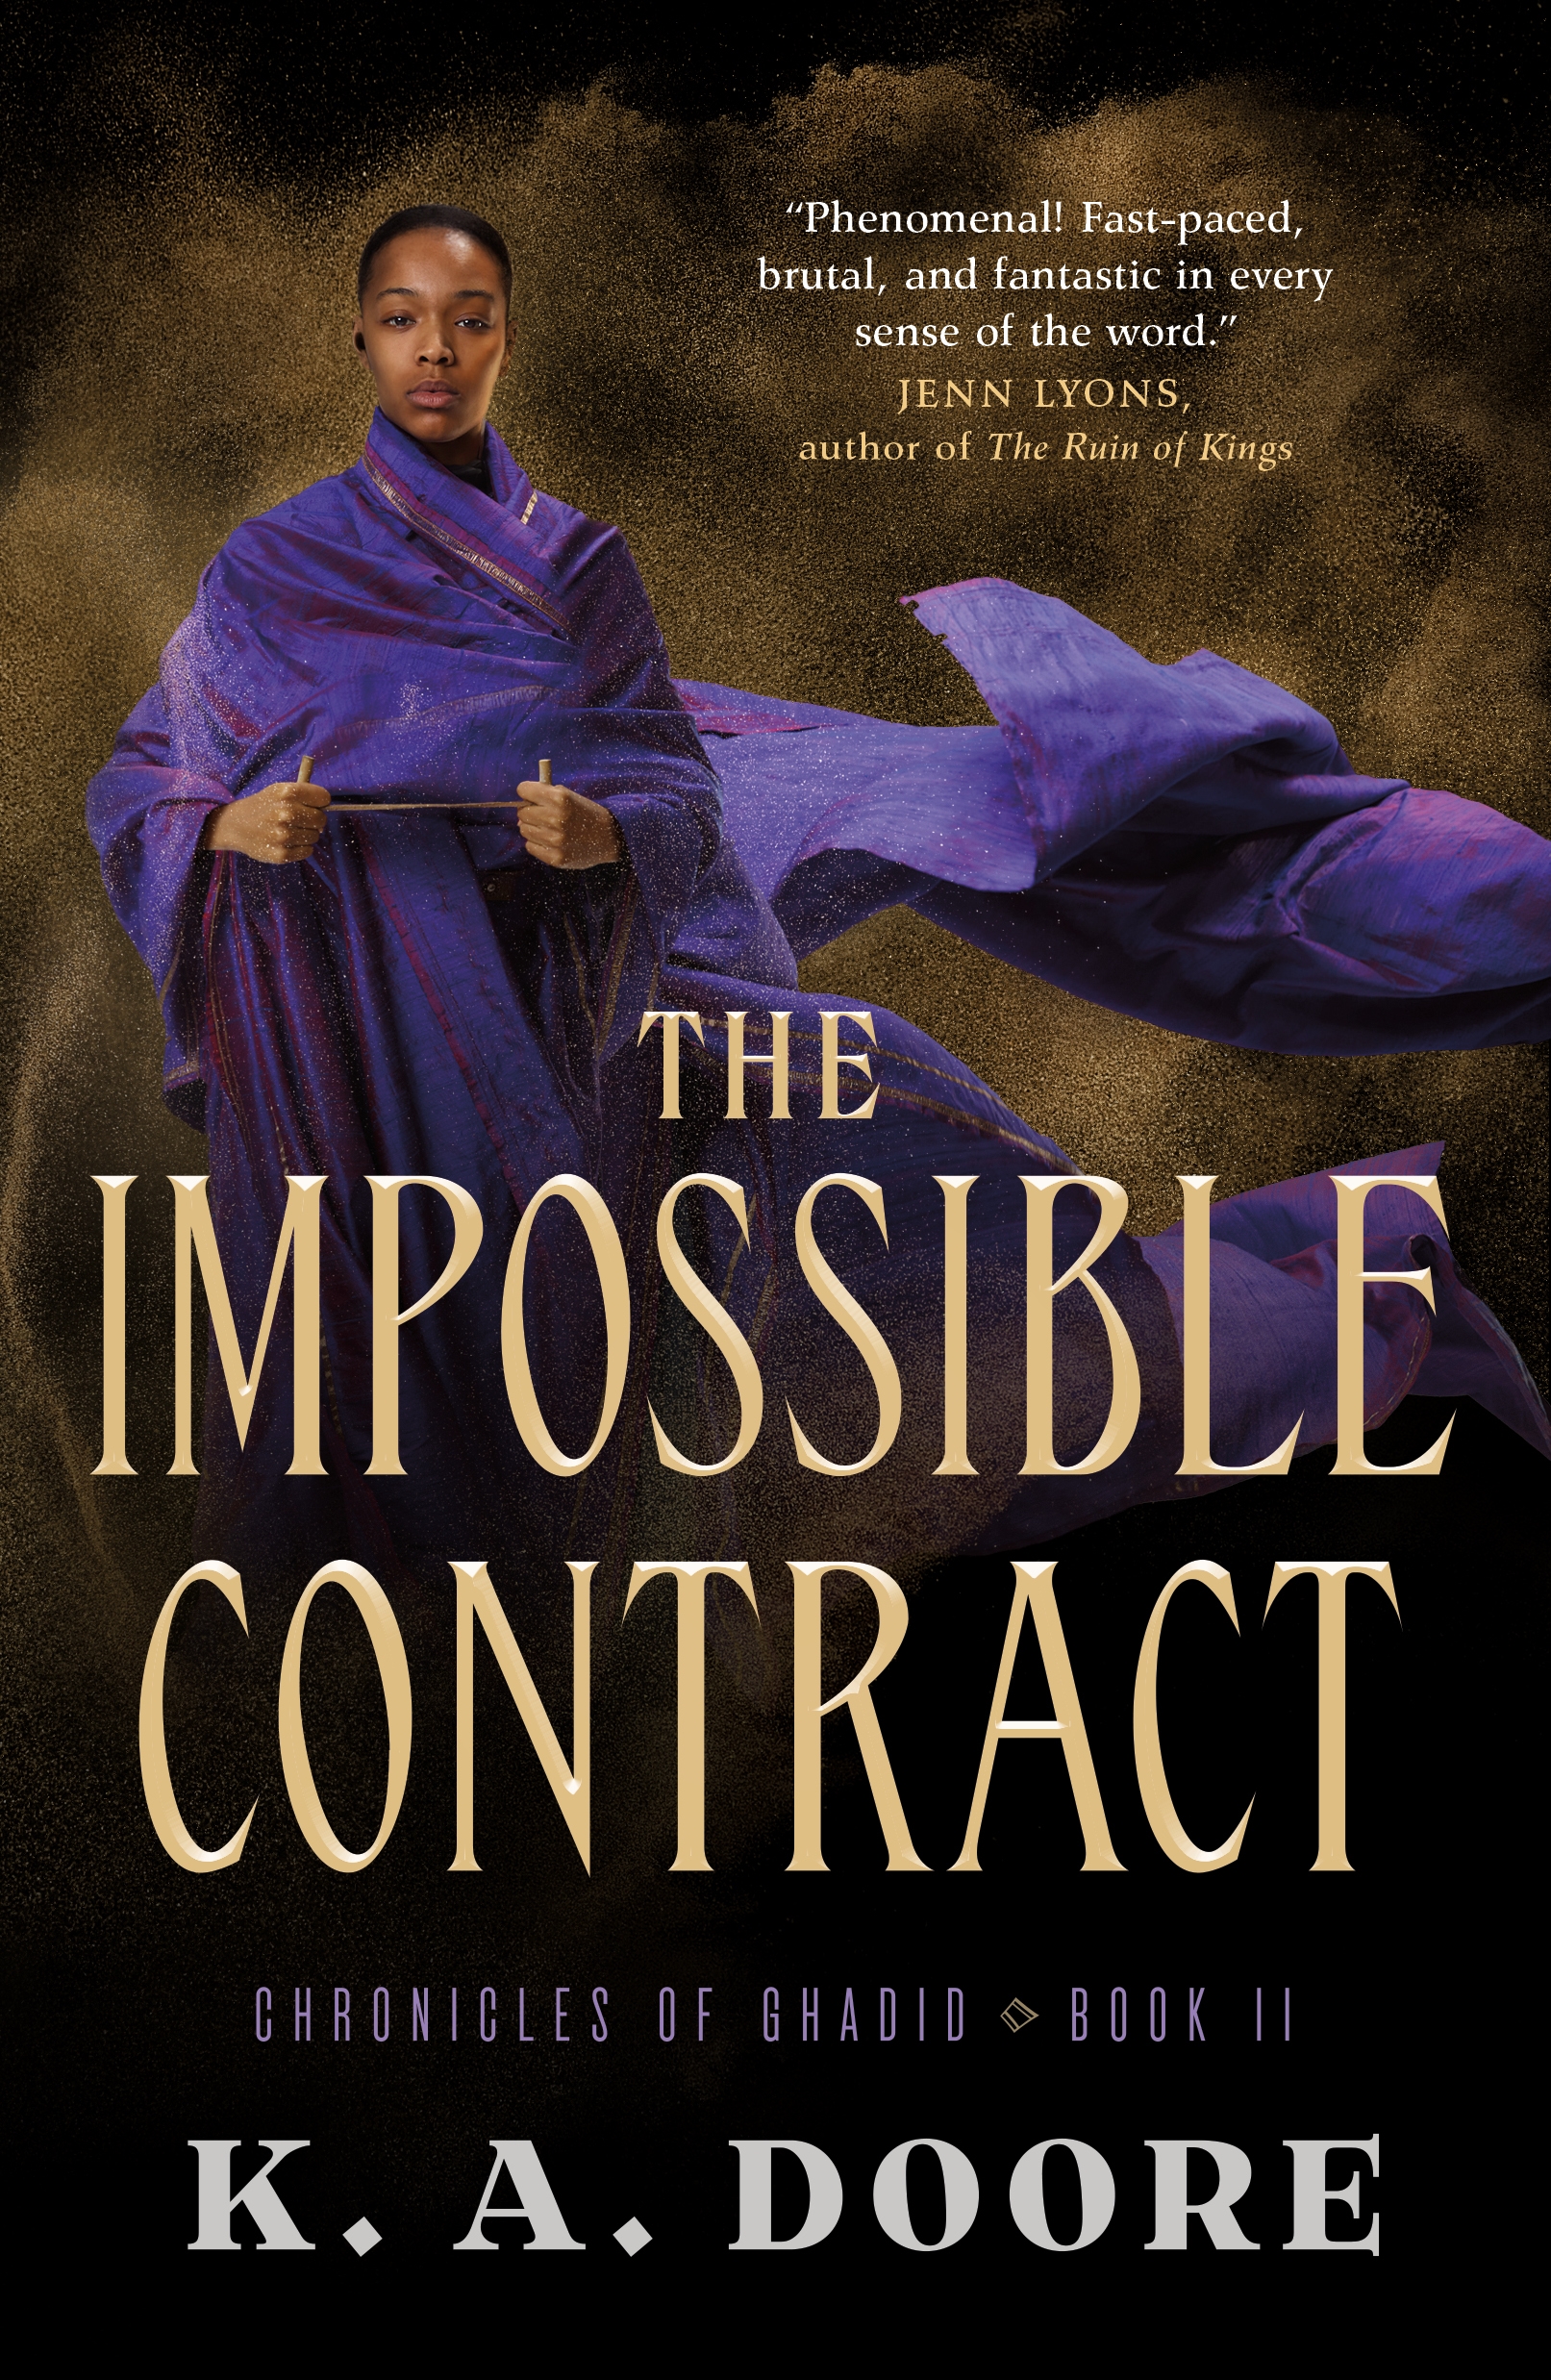 The Impossible Contract : Book 2 in the Chronicles of Ghadid by K. A. Doore